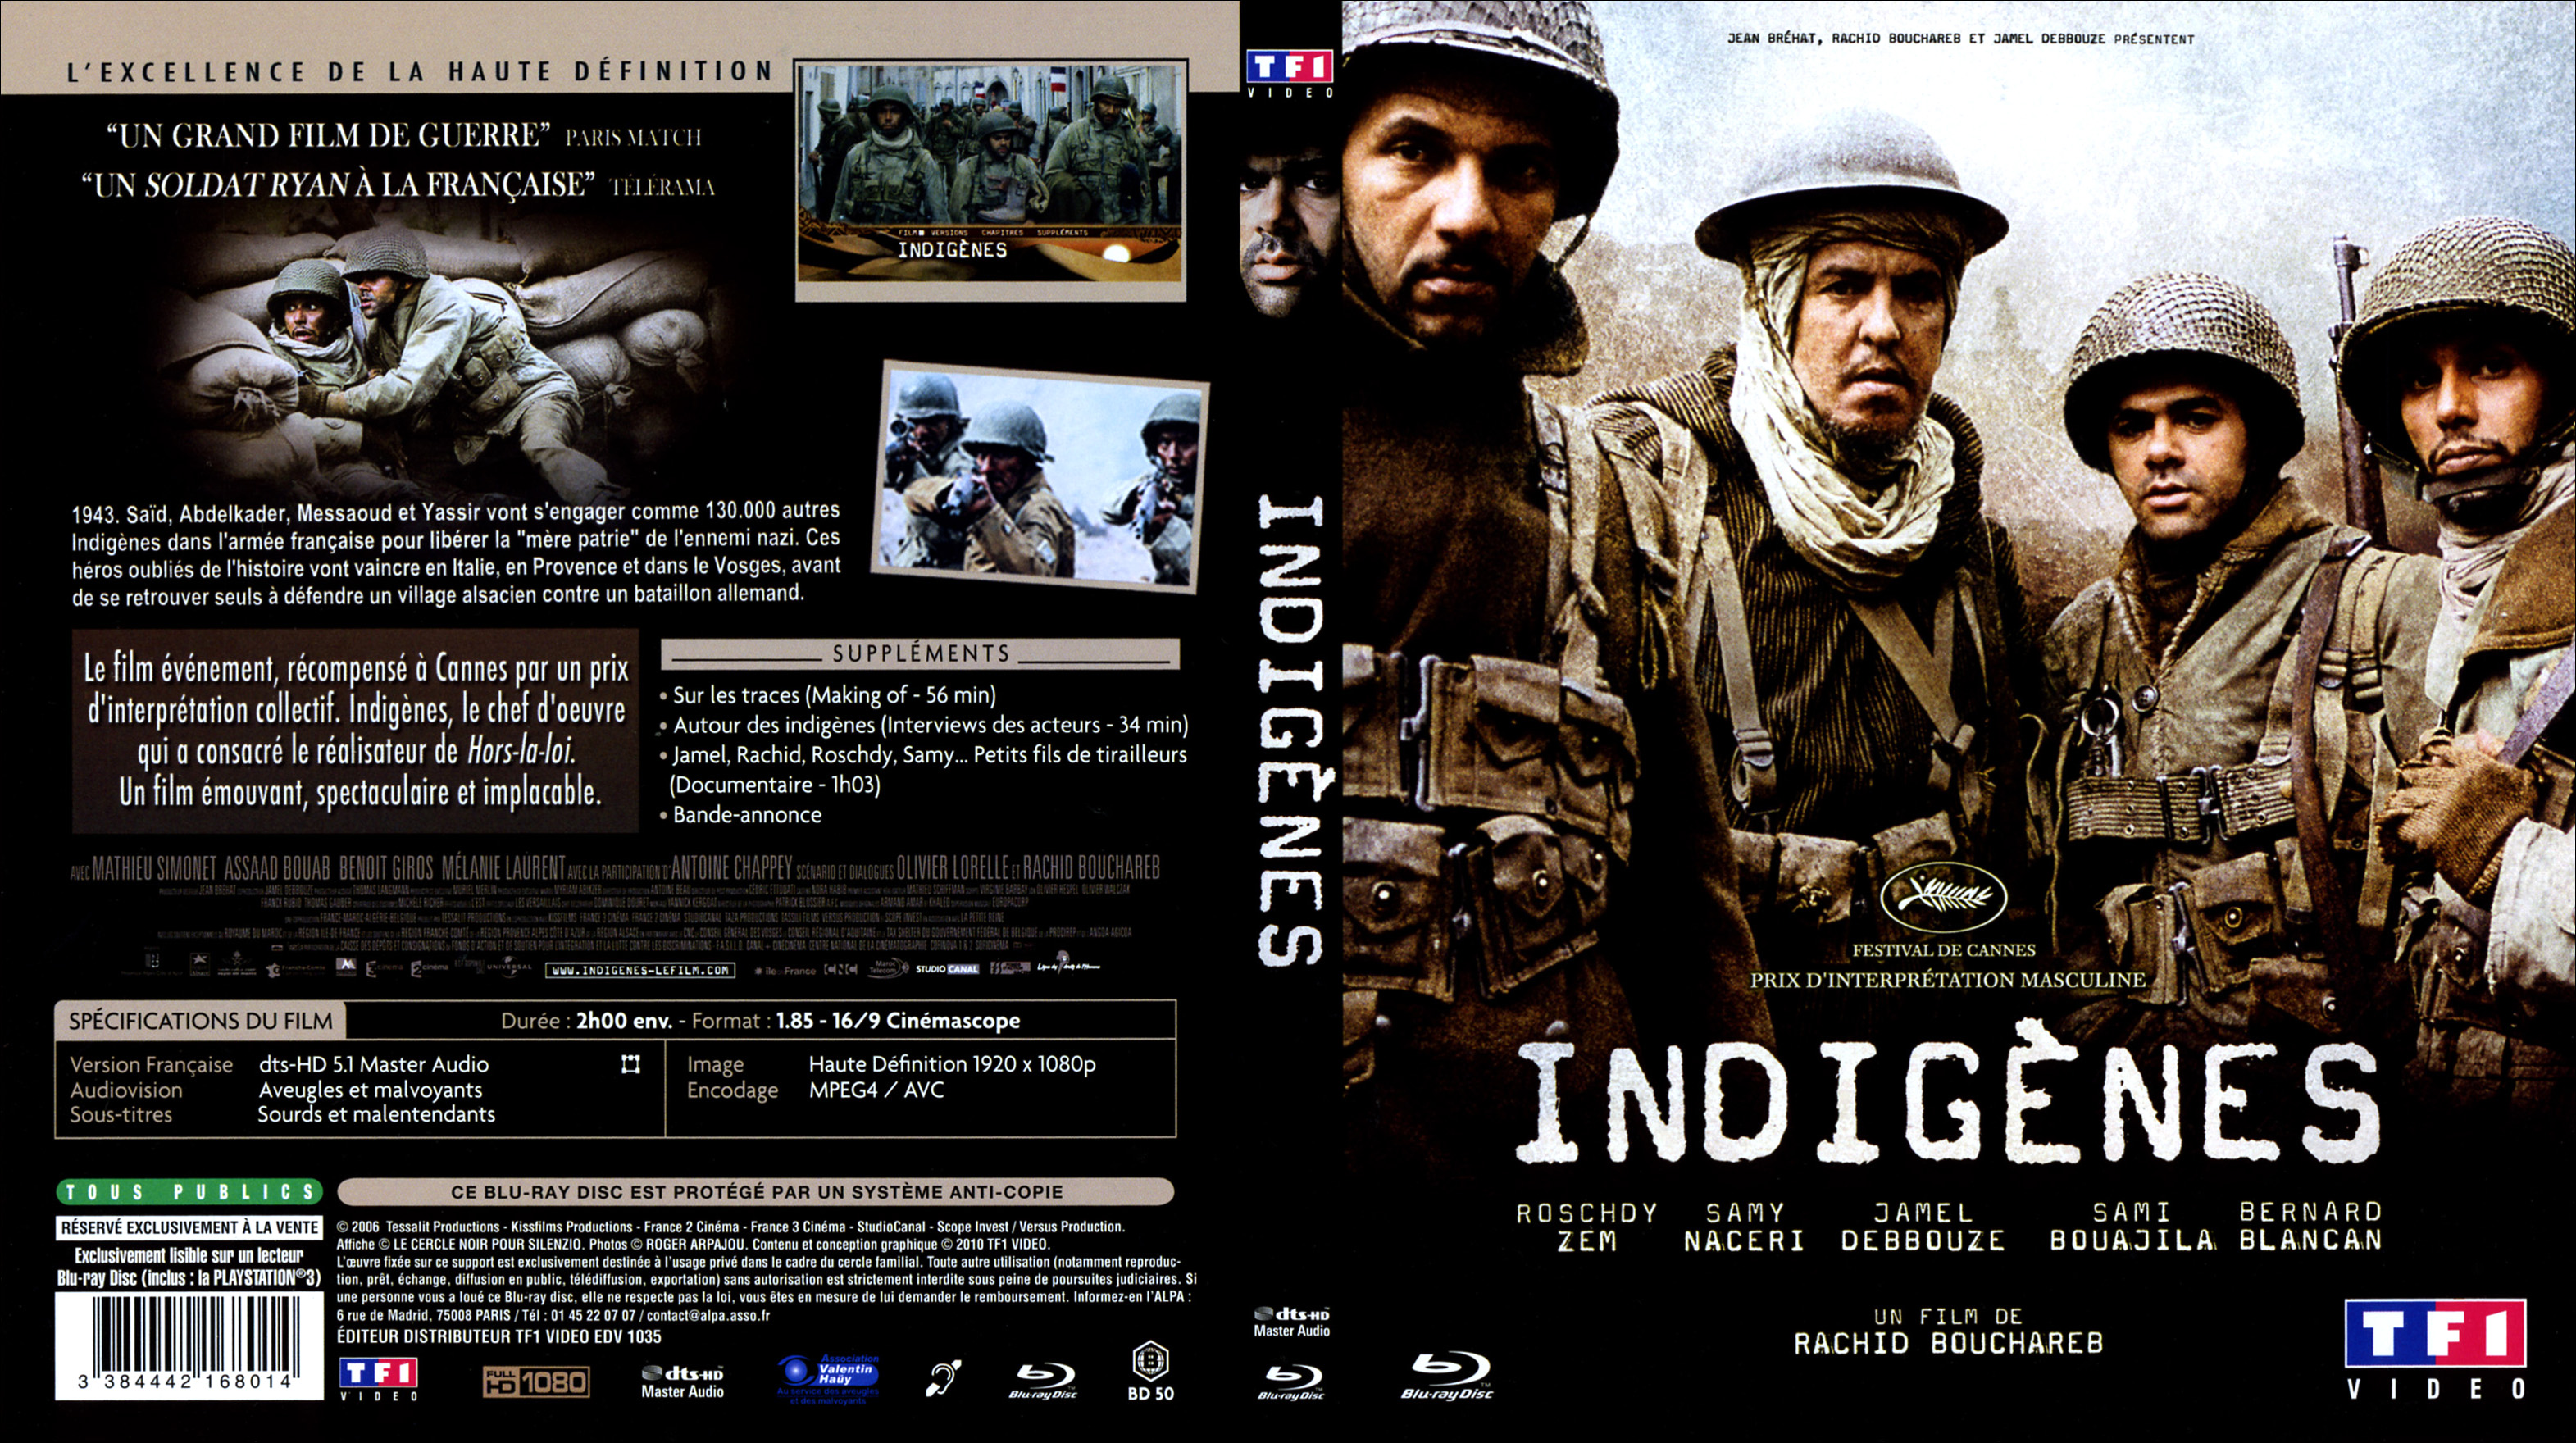 Jaquette DVD Indignes (BLU-RAY)